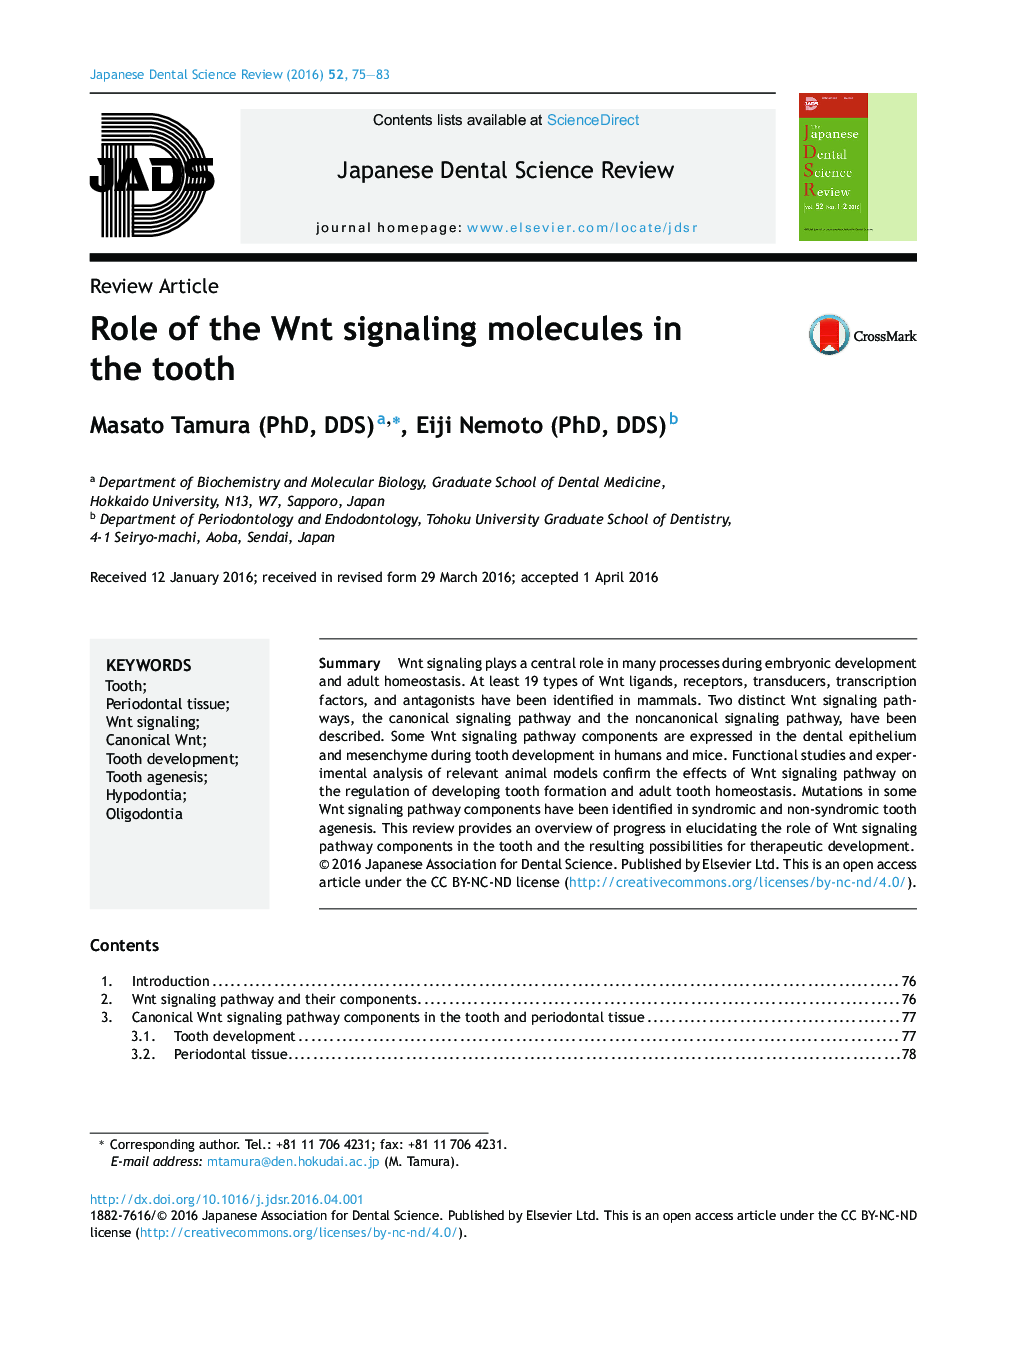 Role of the Wnt signaling molecules in the tooth